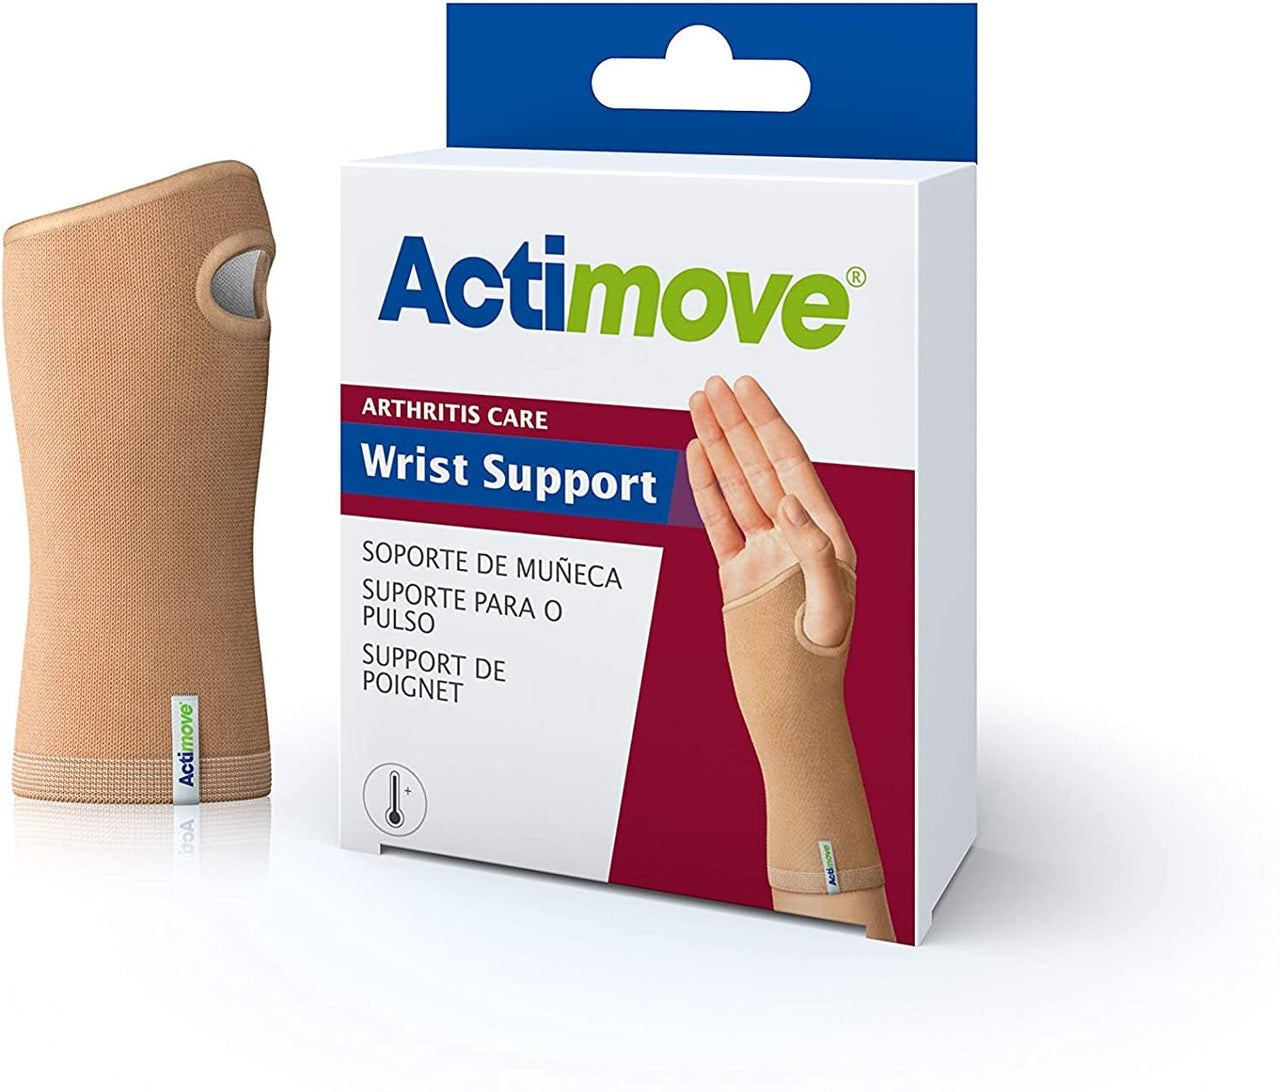 Arthritis Products  Daily Living Aids for People with Arthritis